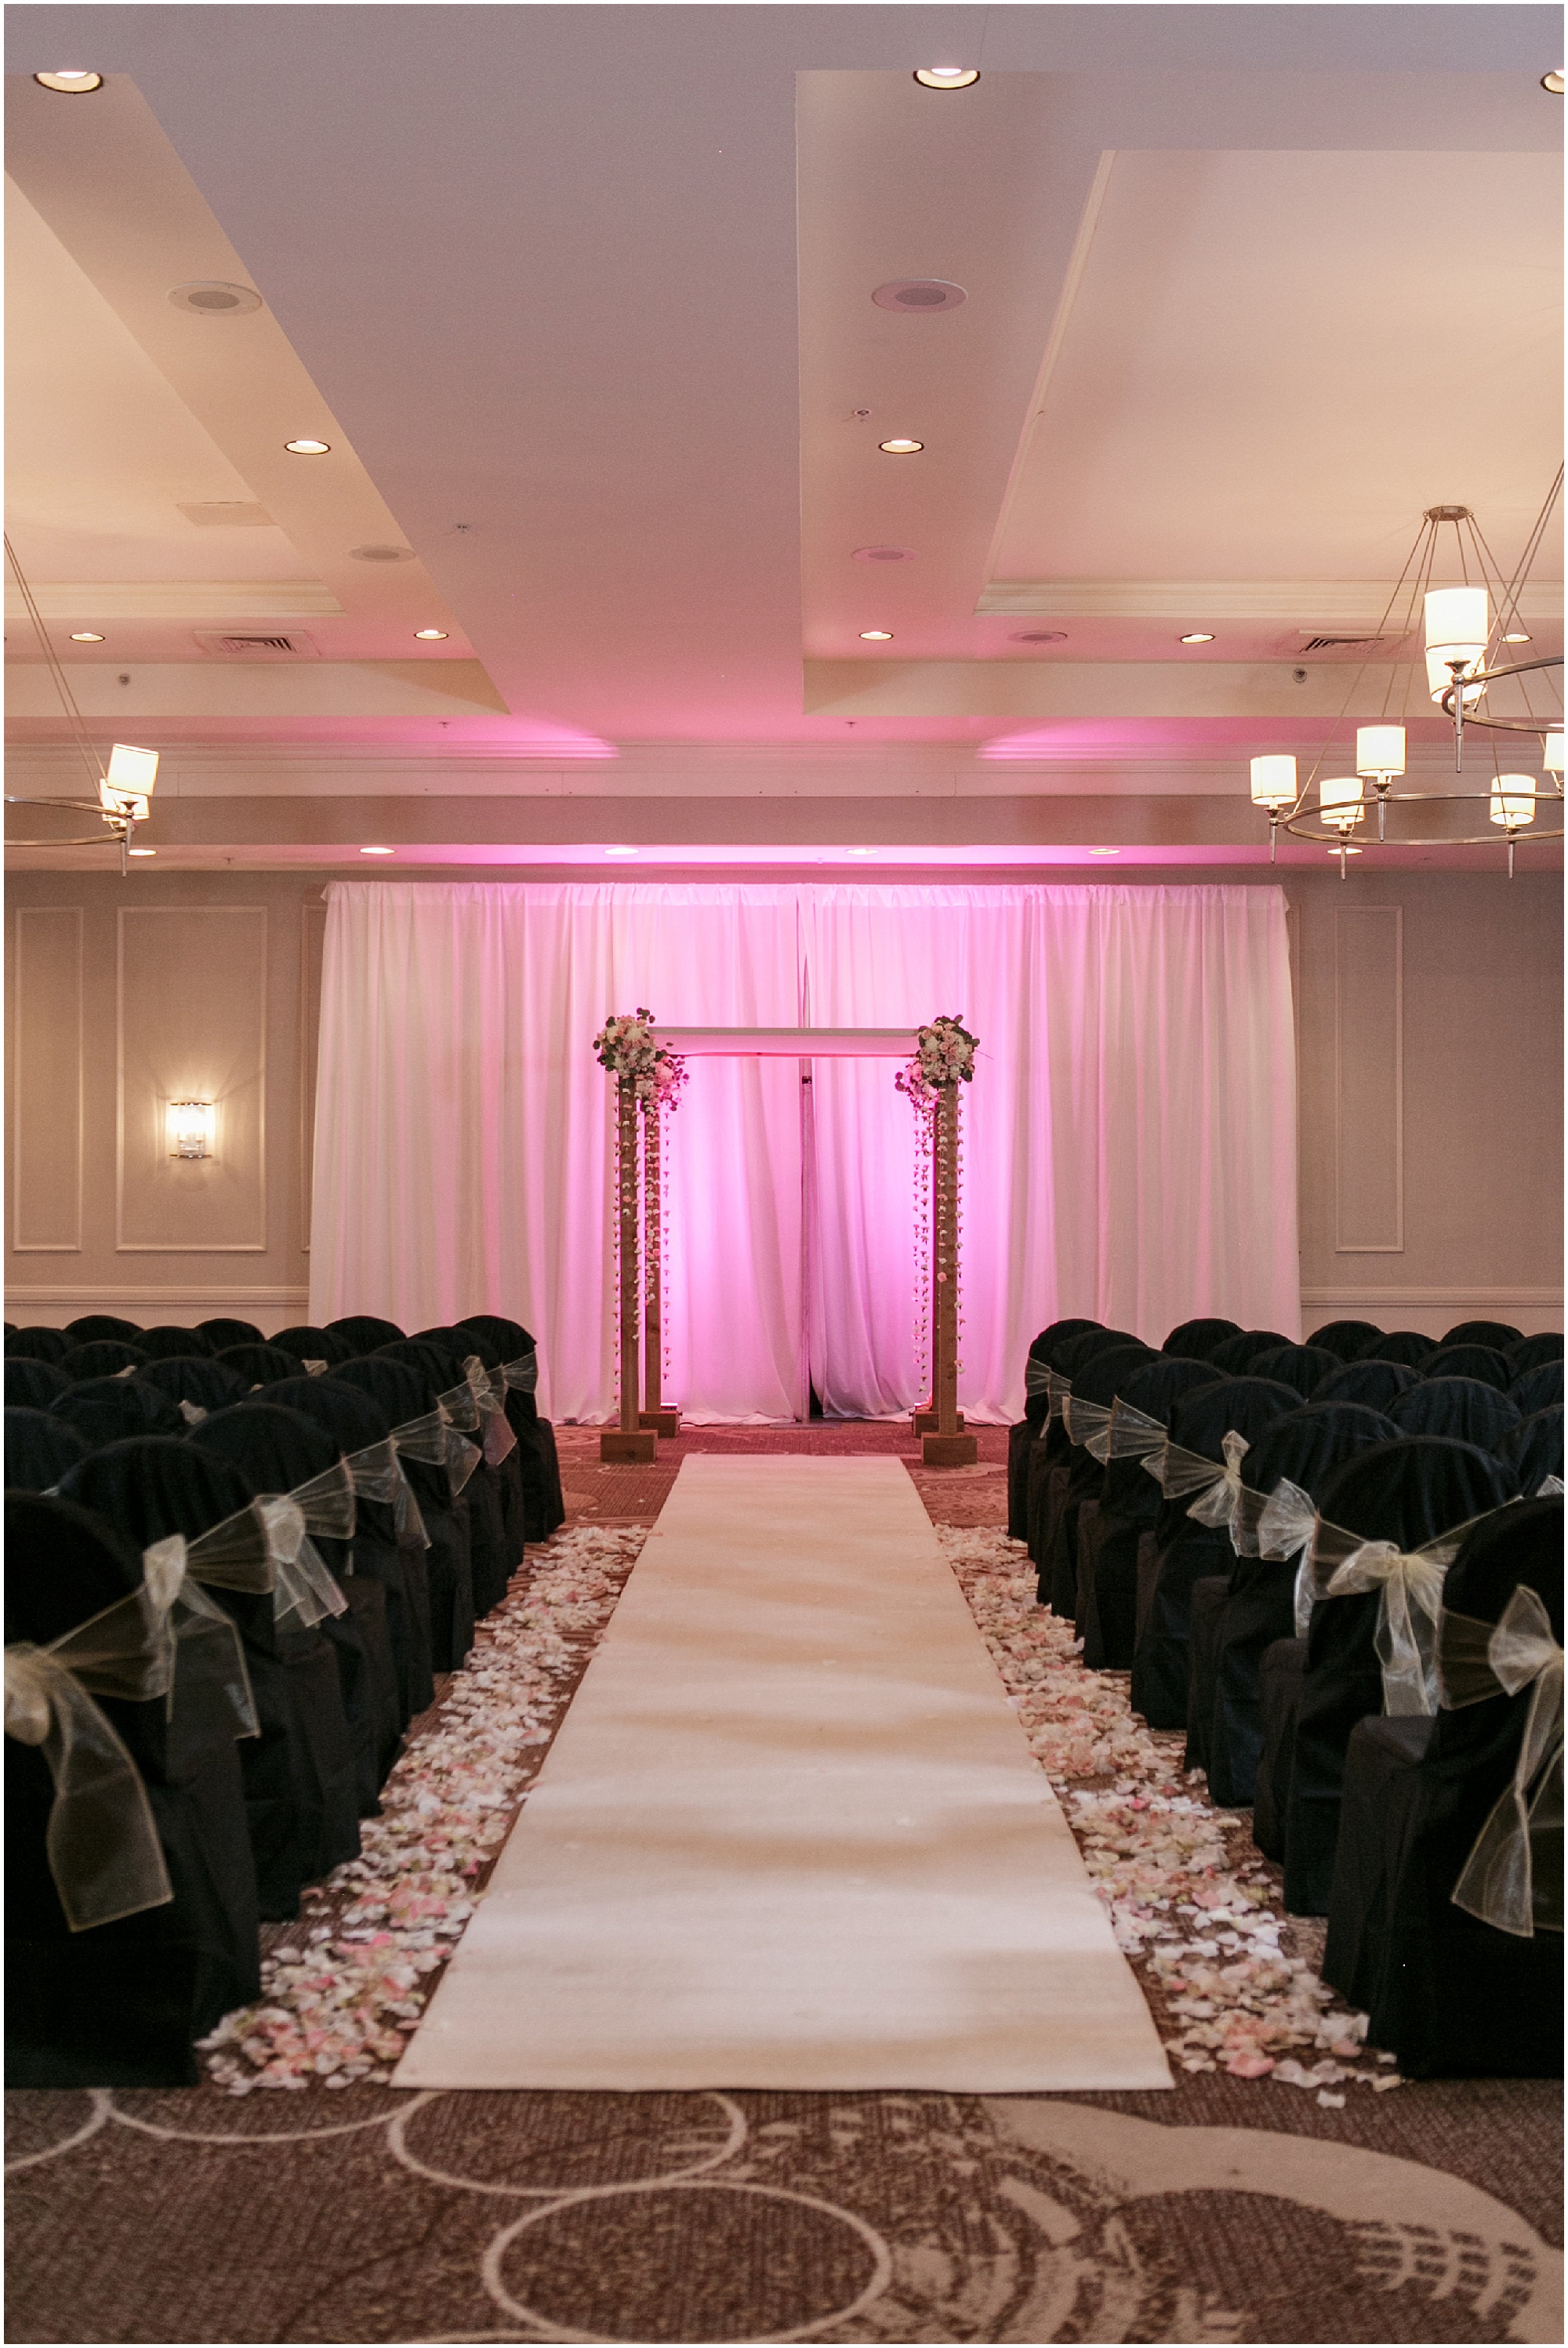 Ceremony space for Fur Ever and Ever wedding at the Sheraton Orlando.